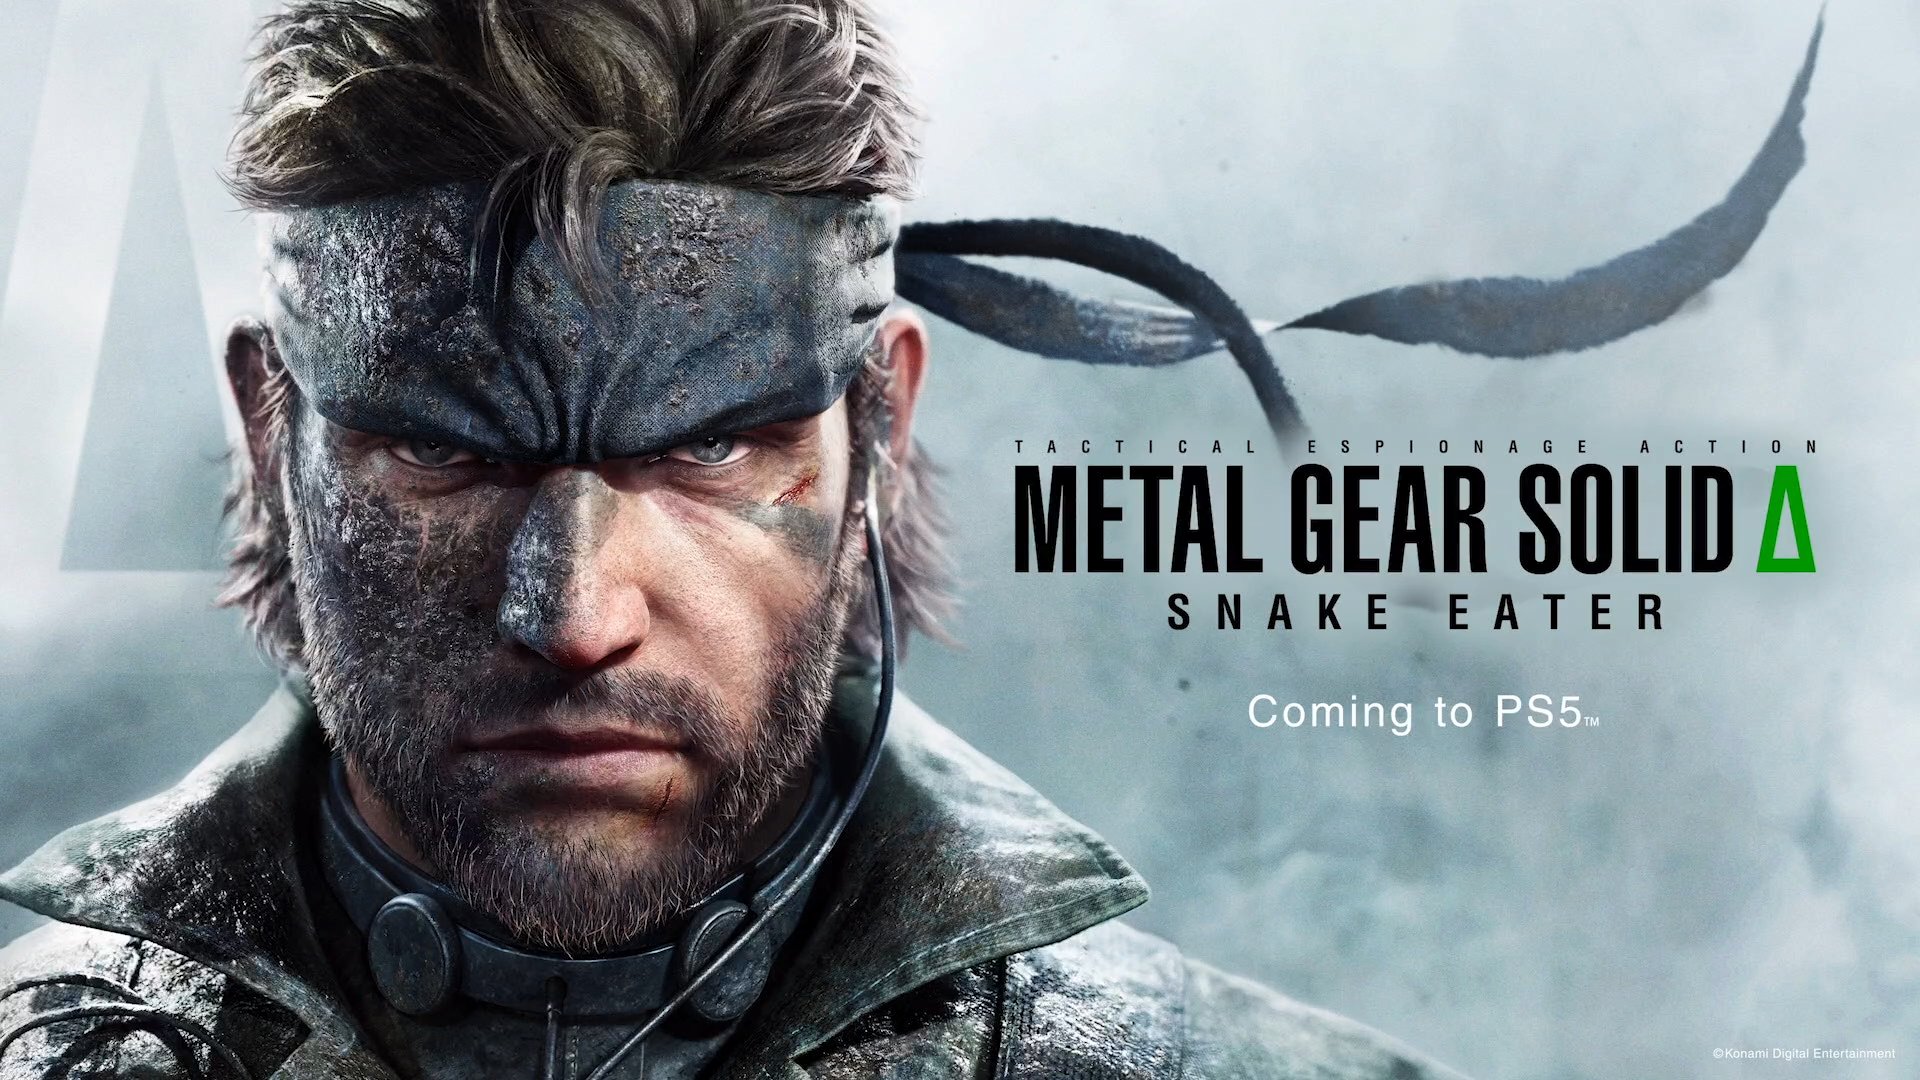 Metal Gear Solid 4 might be coming to PC, and there's proof